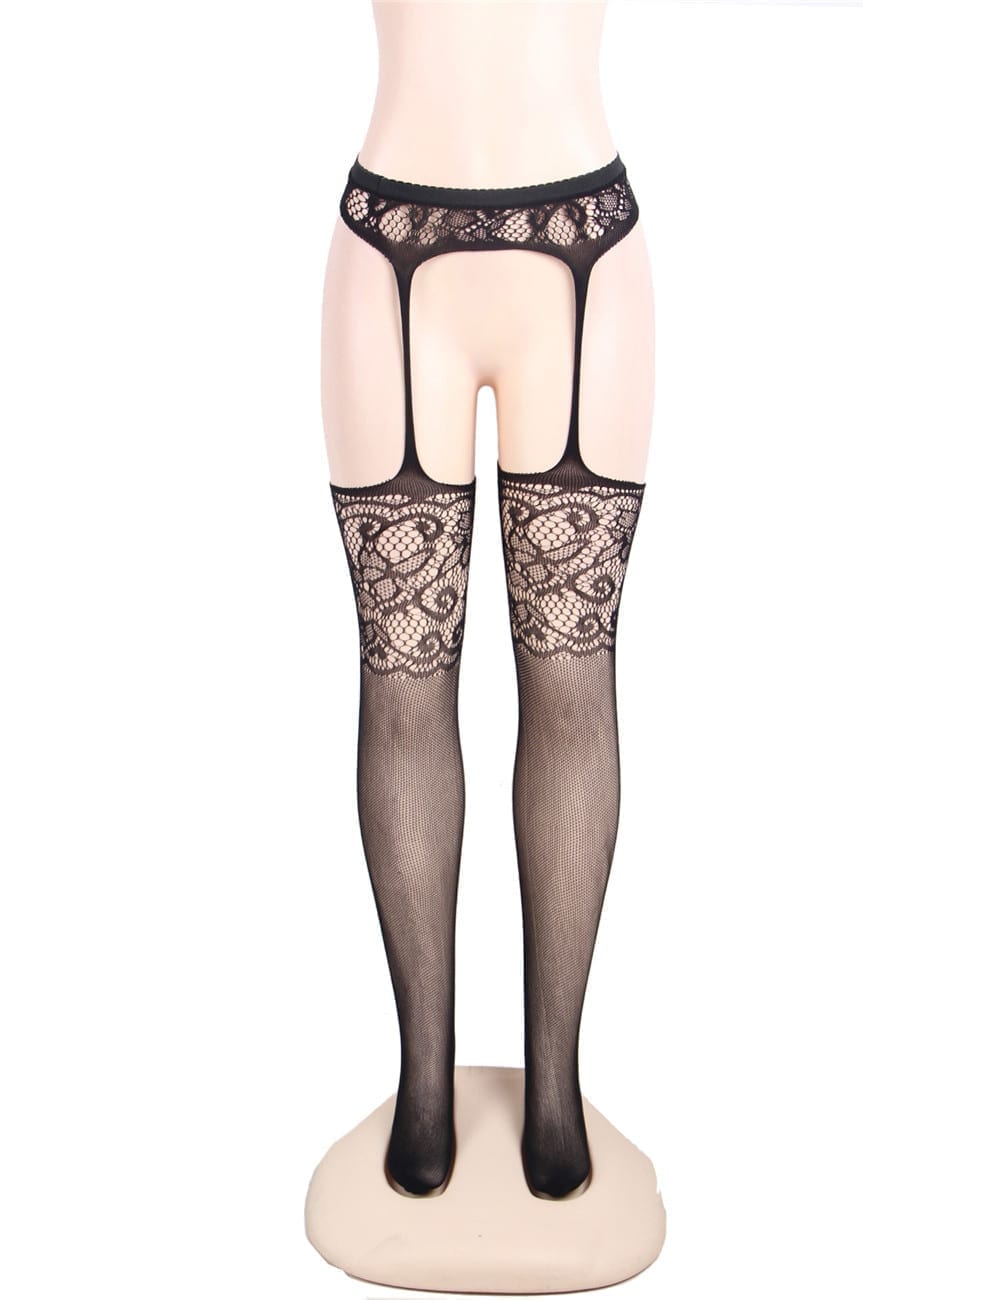 One Piece Lace Suspender and Stockings by My Secret Drawer® mysecretdrawer.co 3